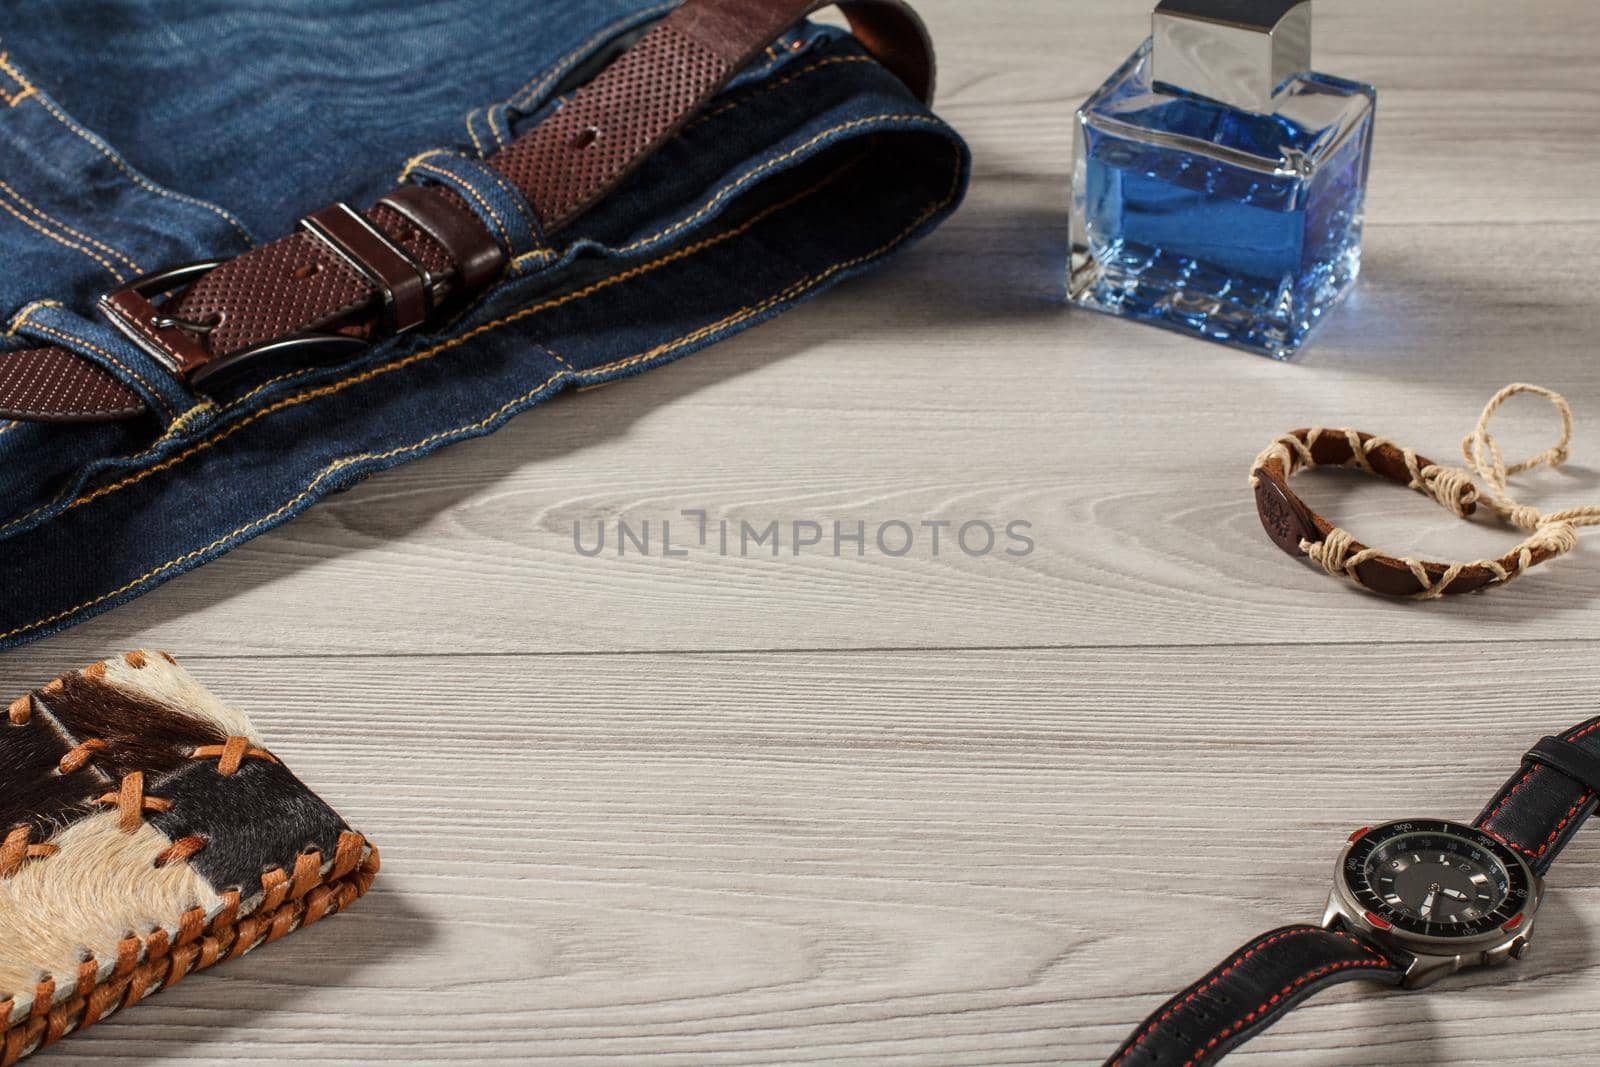 Man perfume, watch with a leather strap, blue jeans with leather belt, amulet and leather purse on a gray wooden background